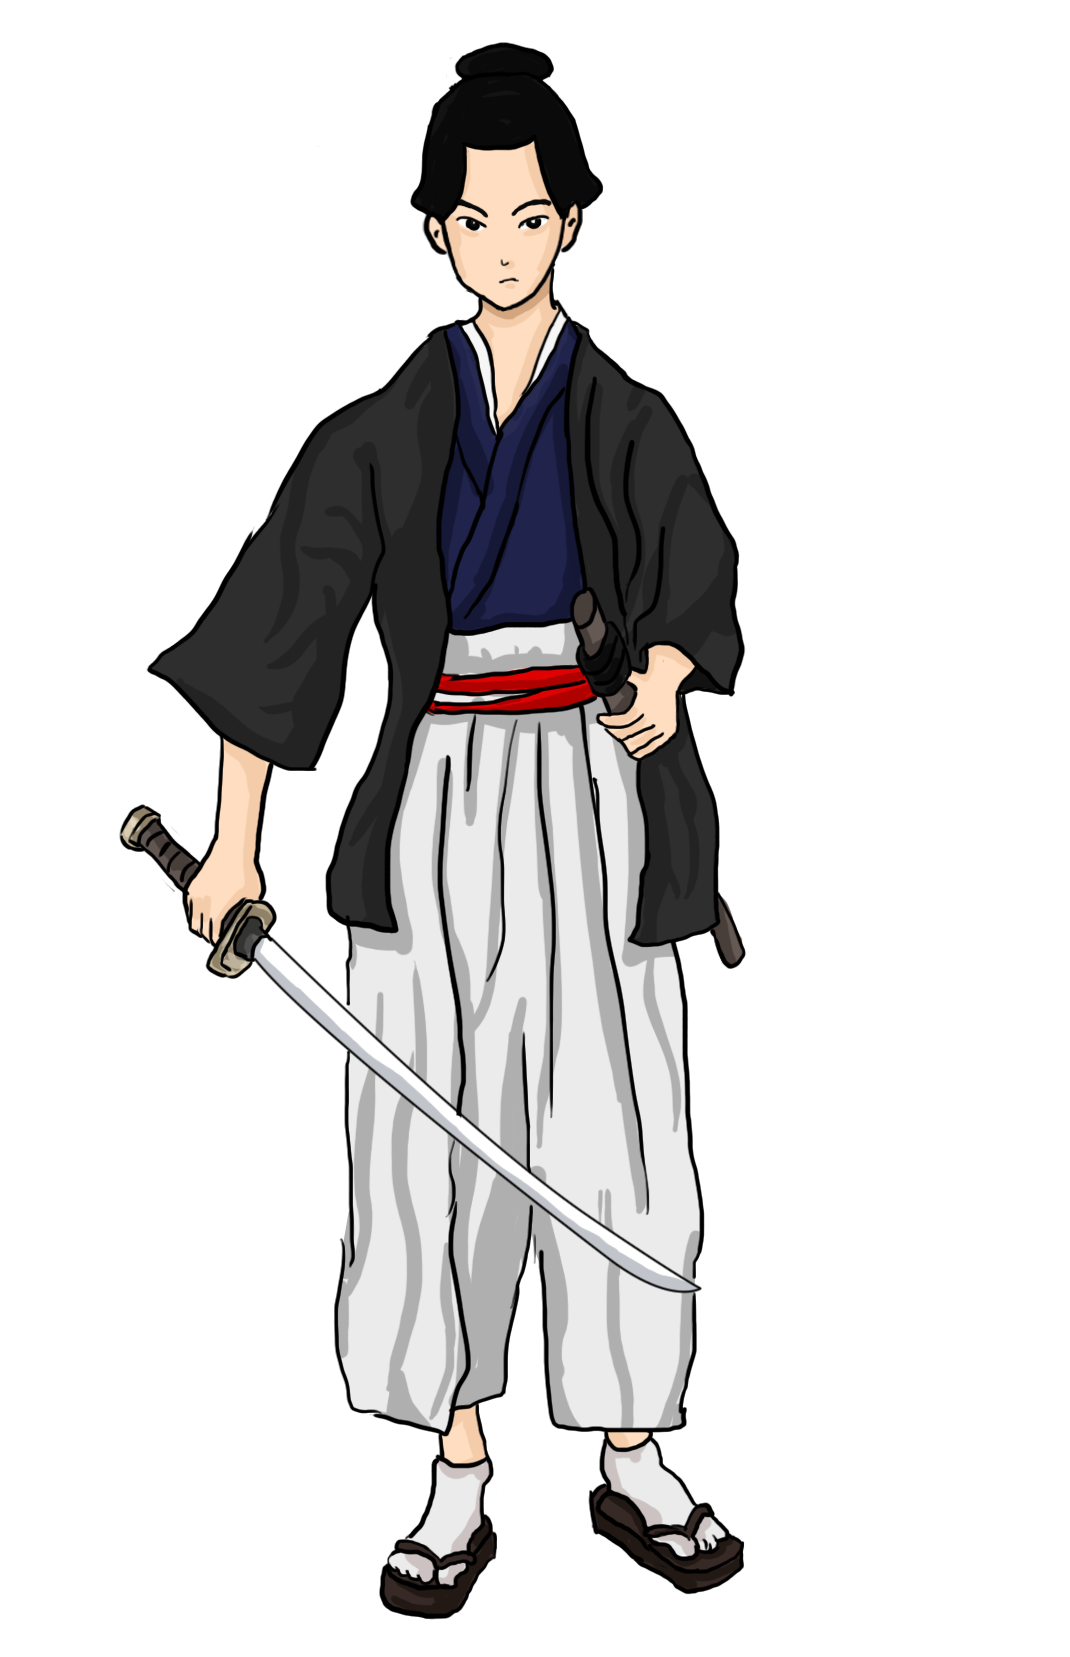 This young samurai clip art is free for personal or commercial use. Use this clip art on your Japanese related projects, reference books, storybooks, ...